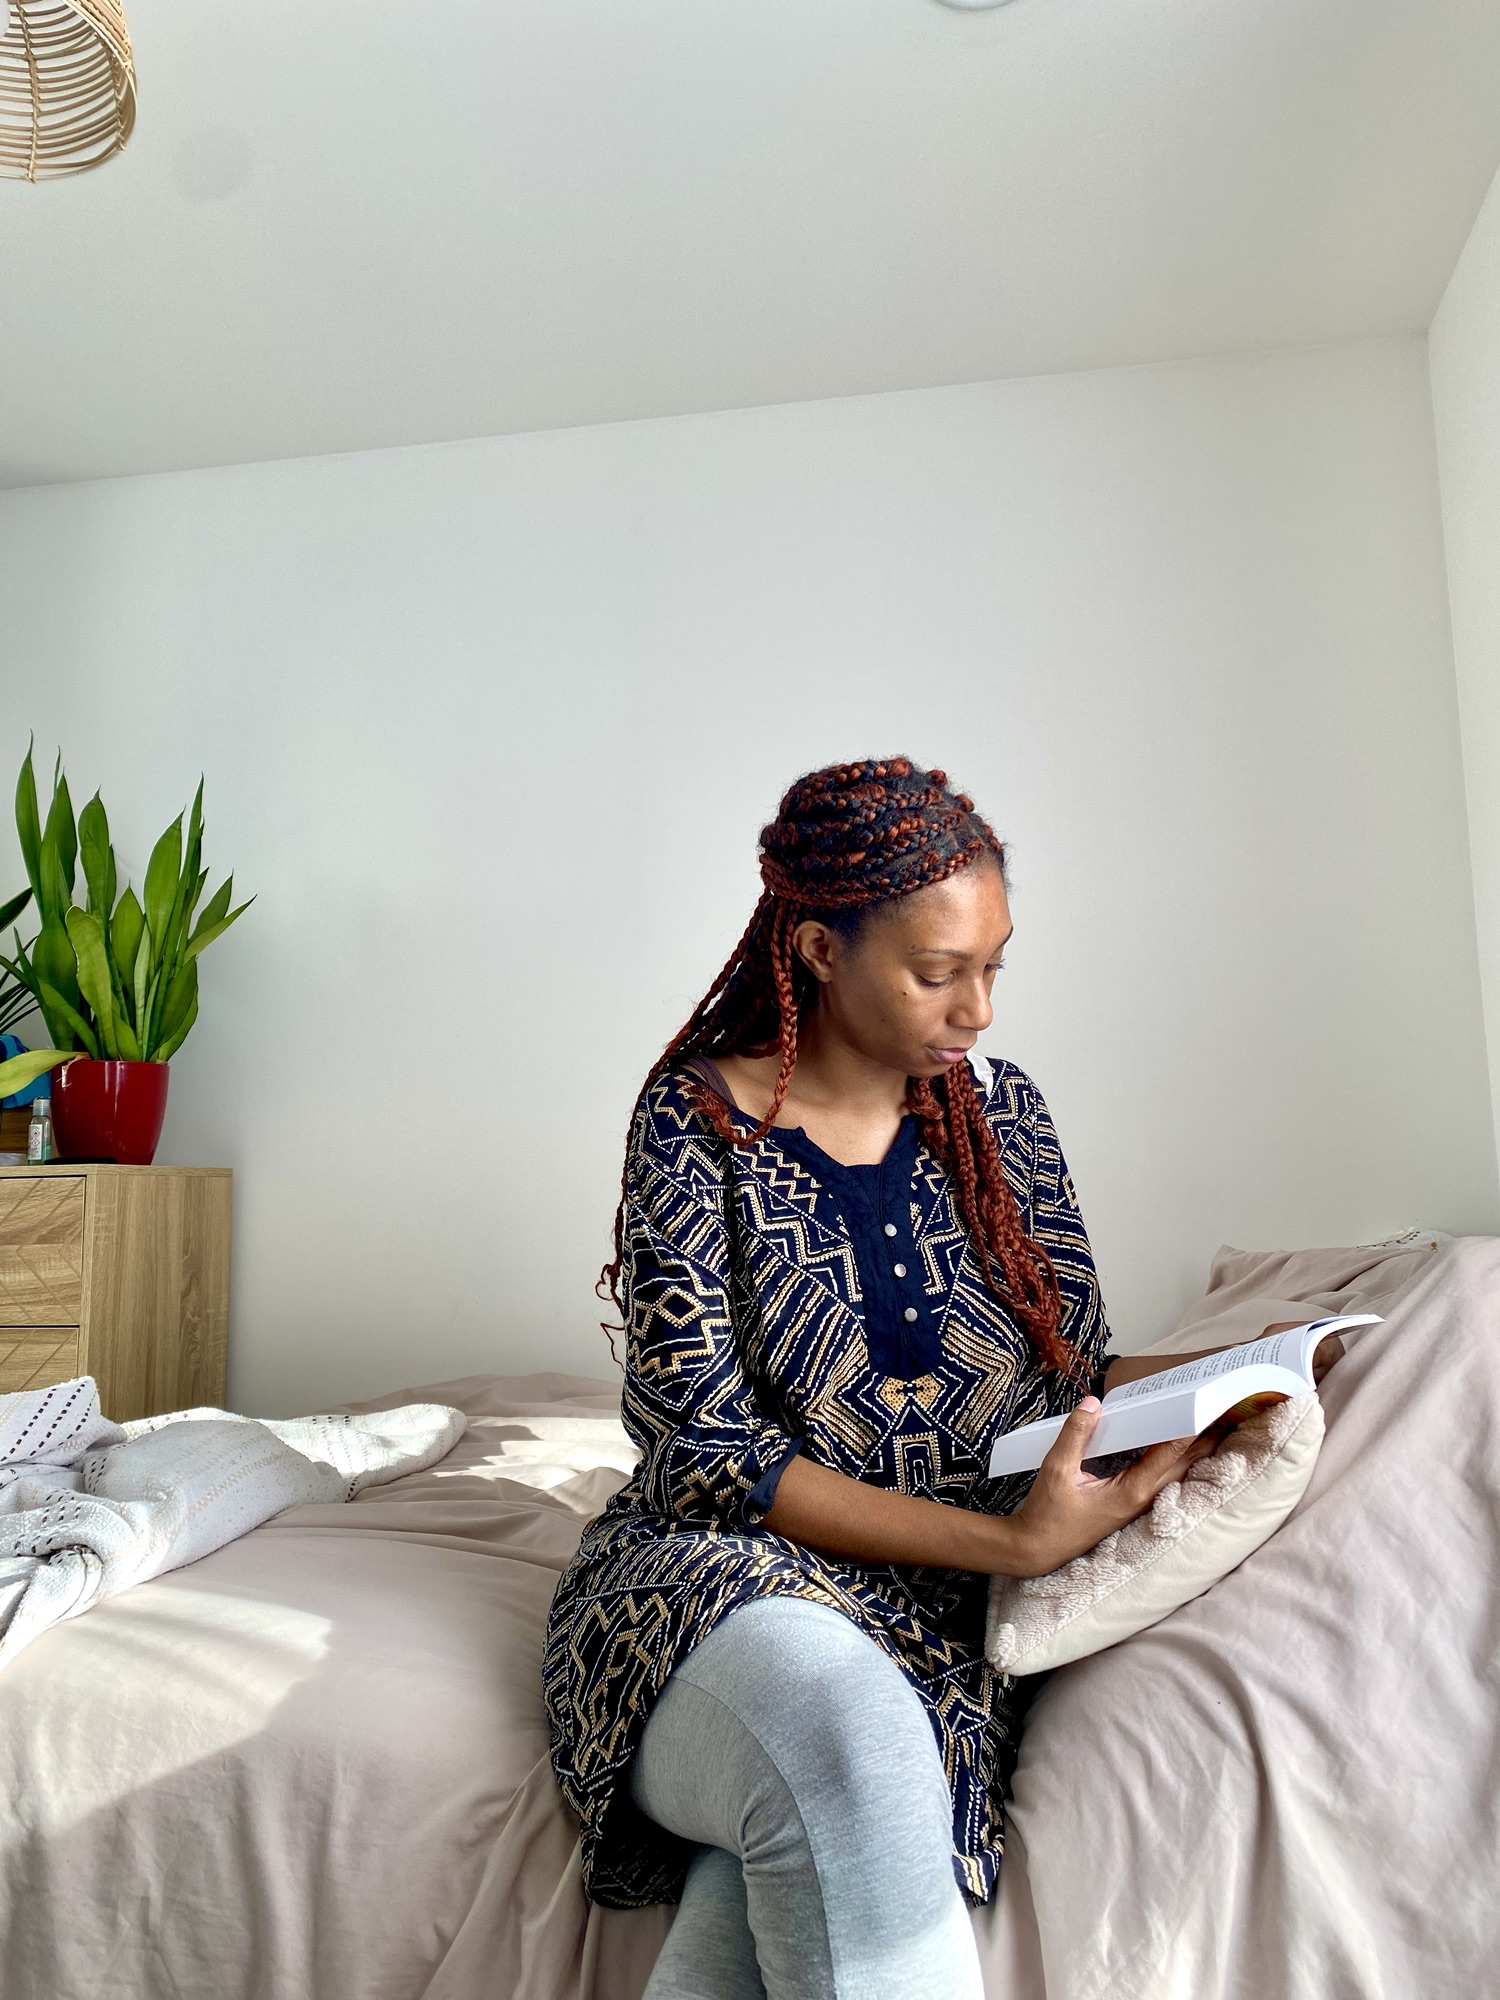 A Black woman sits on a bed reading a book.